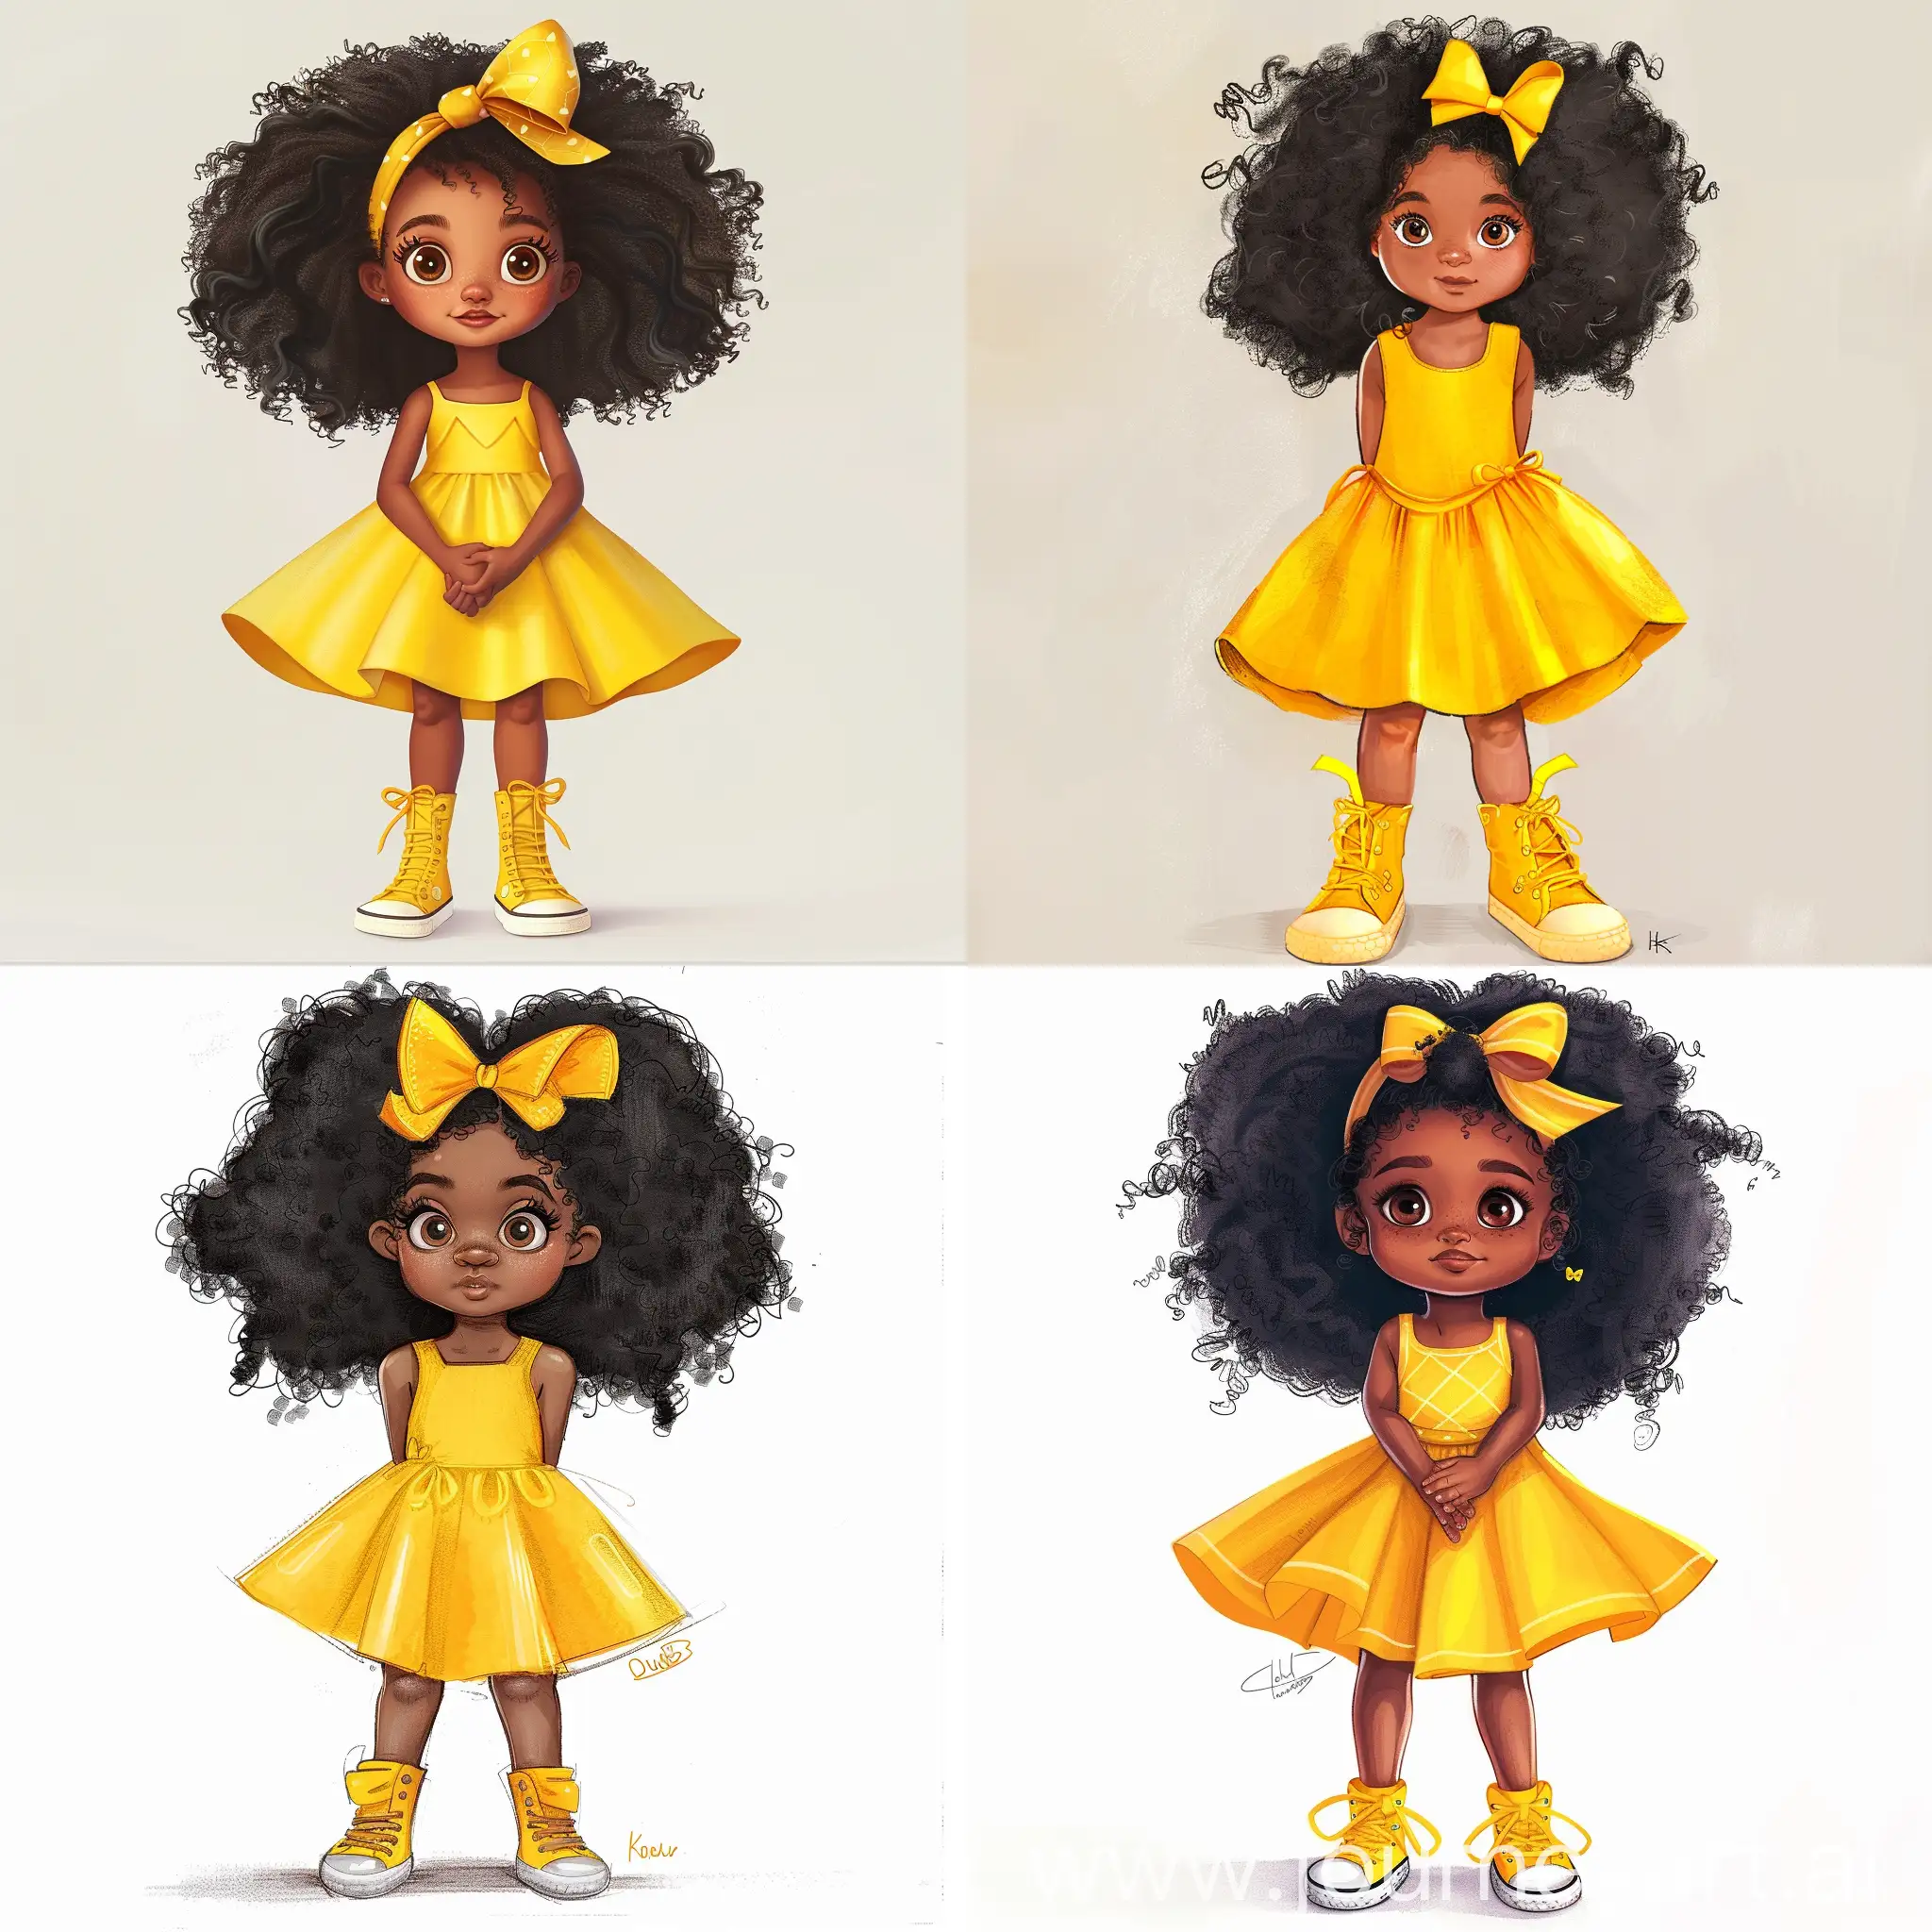  standing full body, 7 year old black girl with big beautiful black curly afro hair,sleeveless sunnyYellow dress,Yellow high top shoes,Yellow Hair bow and Brown Eyes,children's book illustration